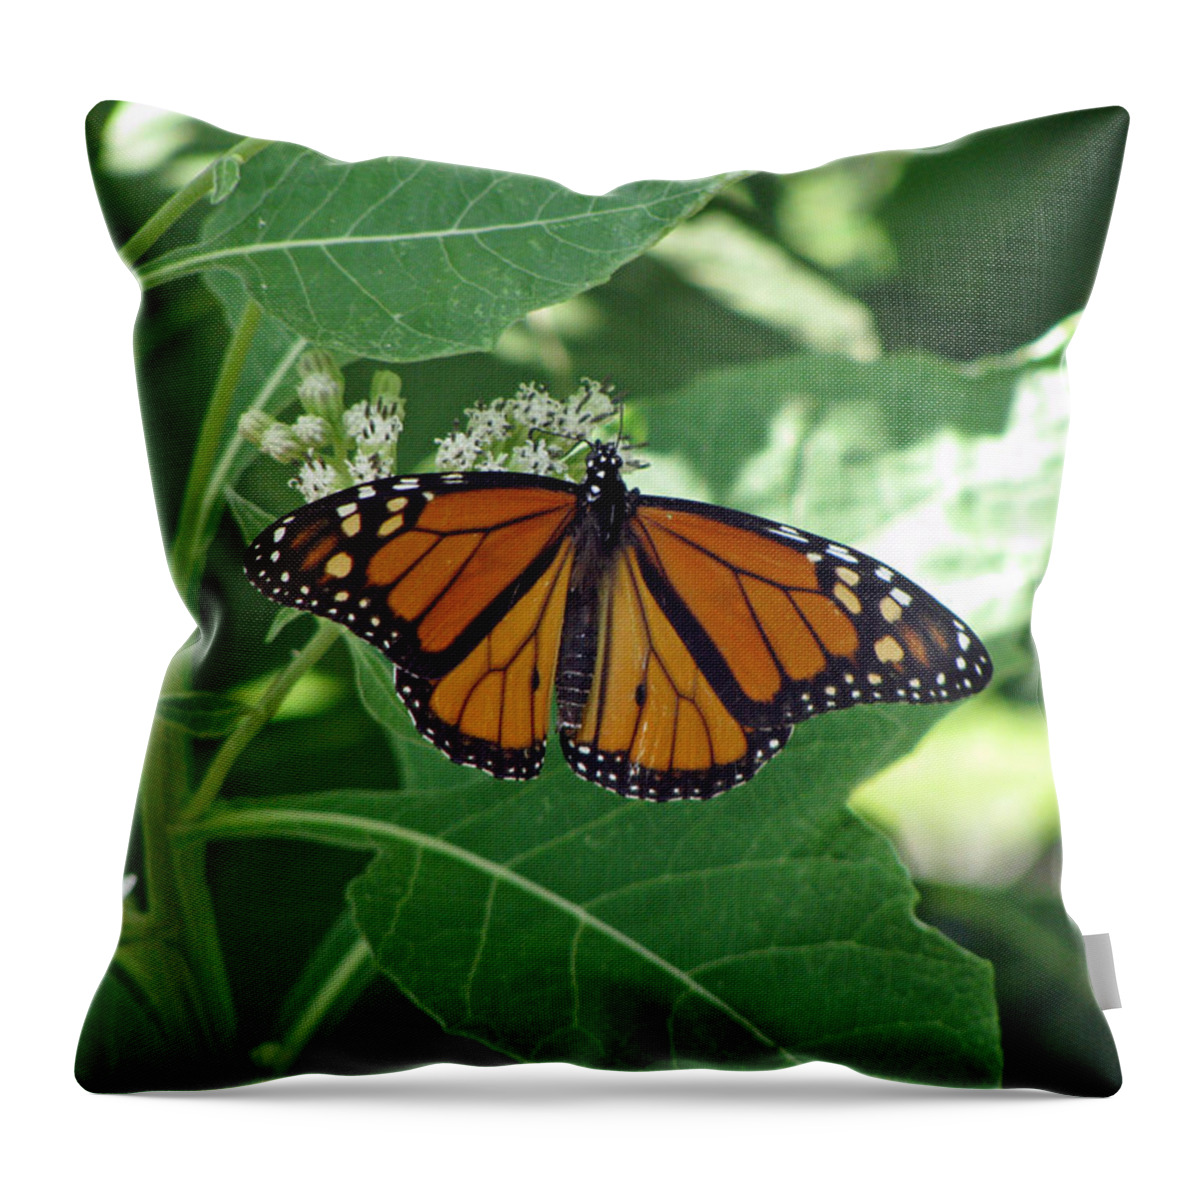 Butterfly Throw Pillow featuring the photograph Monarch Butterfly 36 by Pamela Critchlow